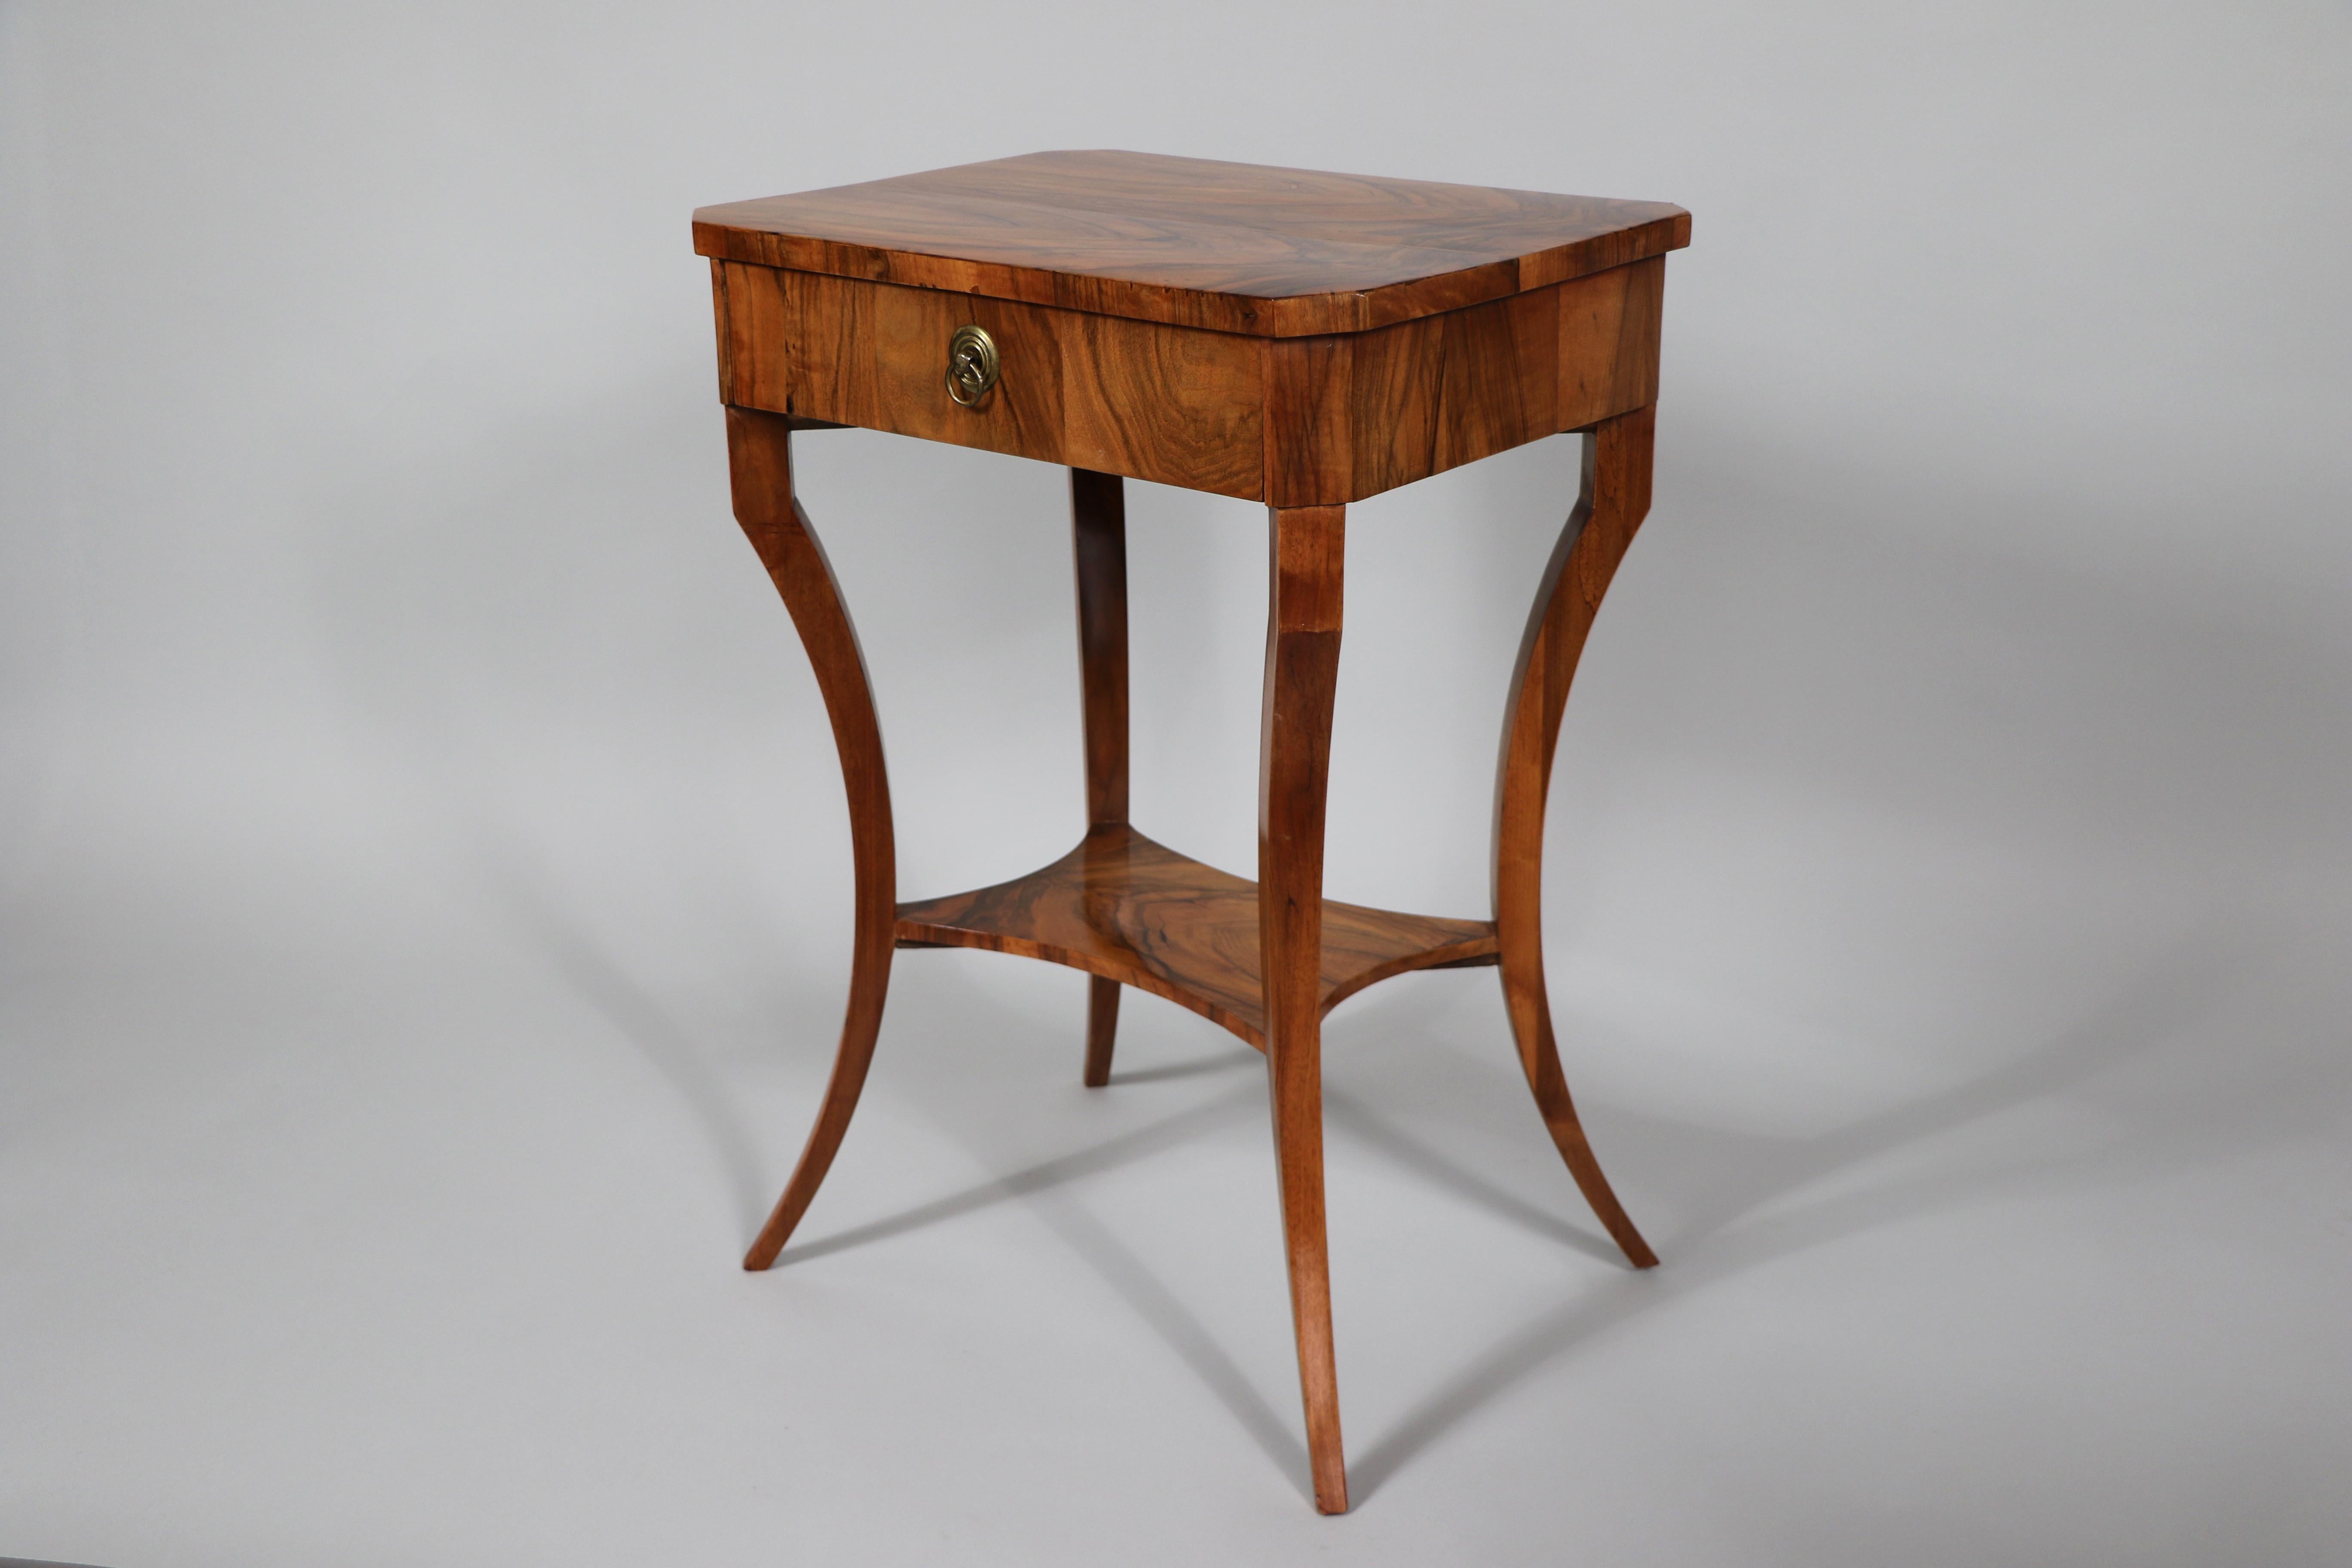 Hello,
This elegant and rare Biedermeier walnut side table was made circa 1825 in Vienna.

Viennese Biedermeier pieces are distinguished by their sophisticated proportions, rare and refined design, excellent craftsmanship and continue to have a